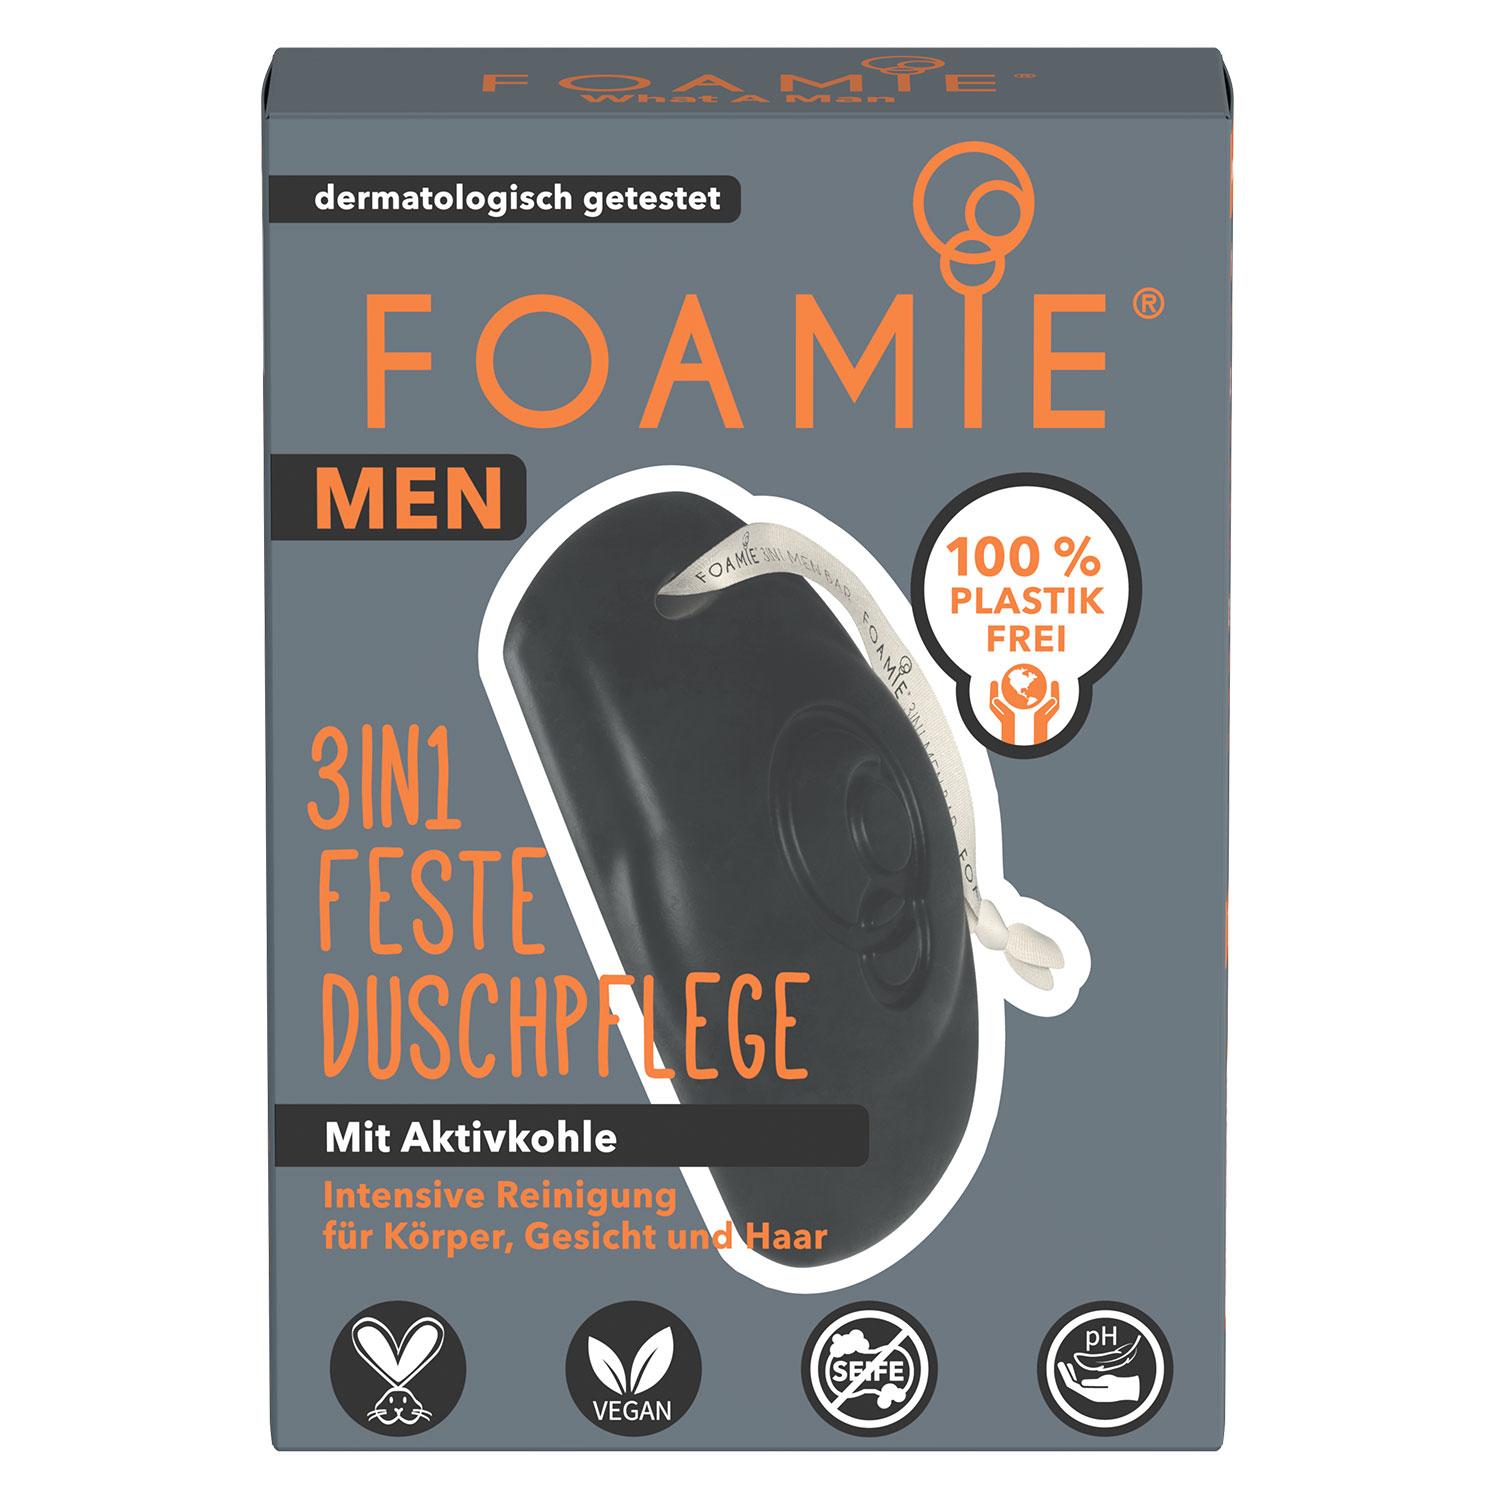 Foamie - Men 3in1 Solid shower care What a Man